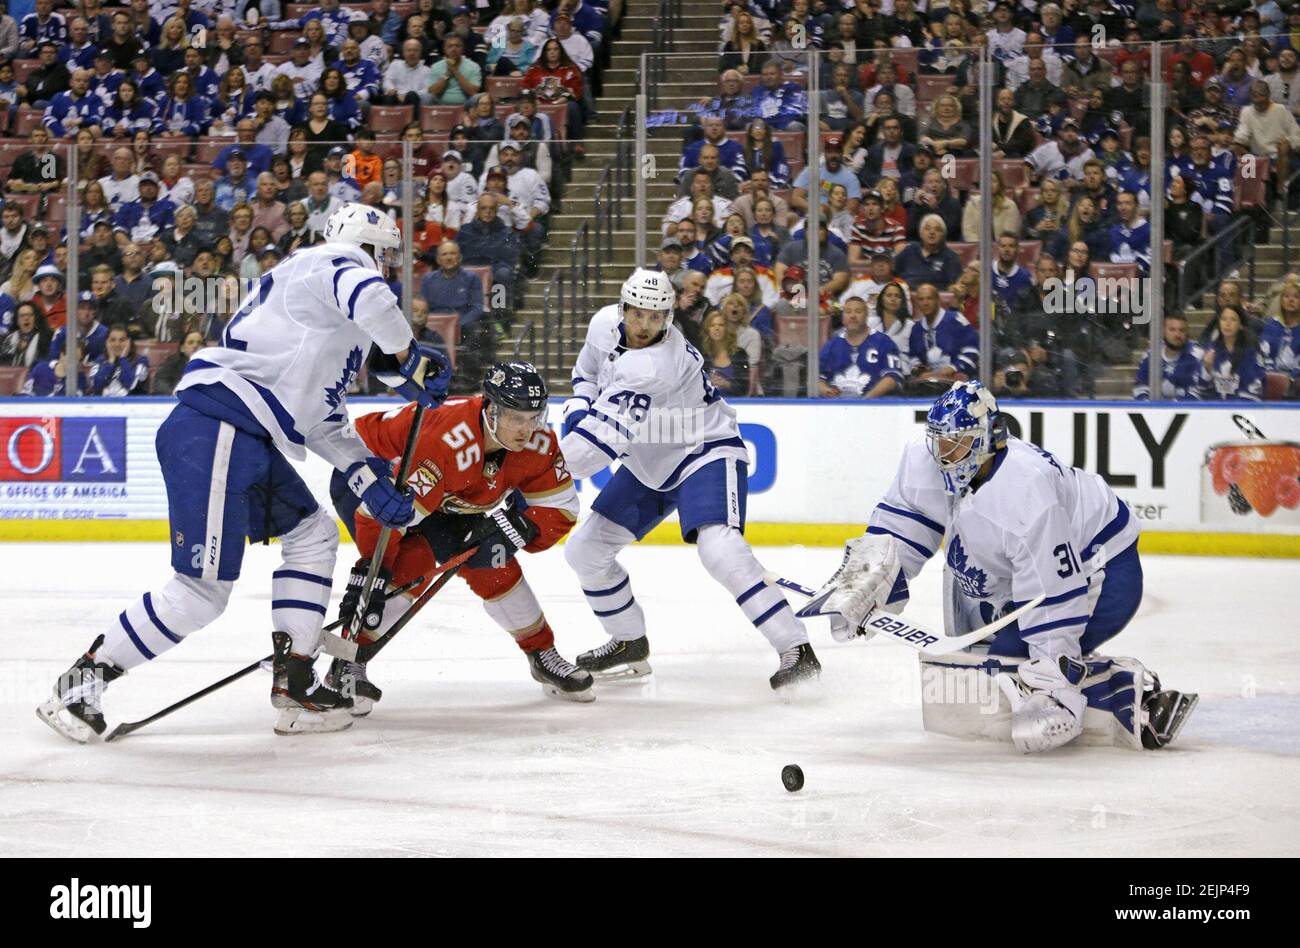 Toronto Maple Leafs goalie Frederik Andersen (31), with help from Martin Marincin (52) and Calle Rosen (48), defend against the Florida Panthers' Noel Acciari (55) during the second periodÂ at the BB&T Center in Sunrise, Fla., on Thursday, Feb. 27, 2020. (David Santiago/Miami Herald/TNS) Stock Photo